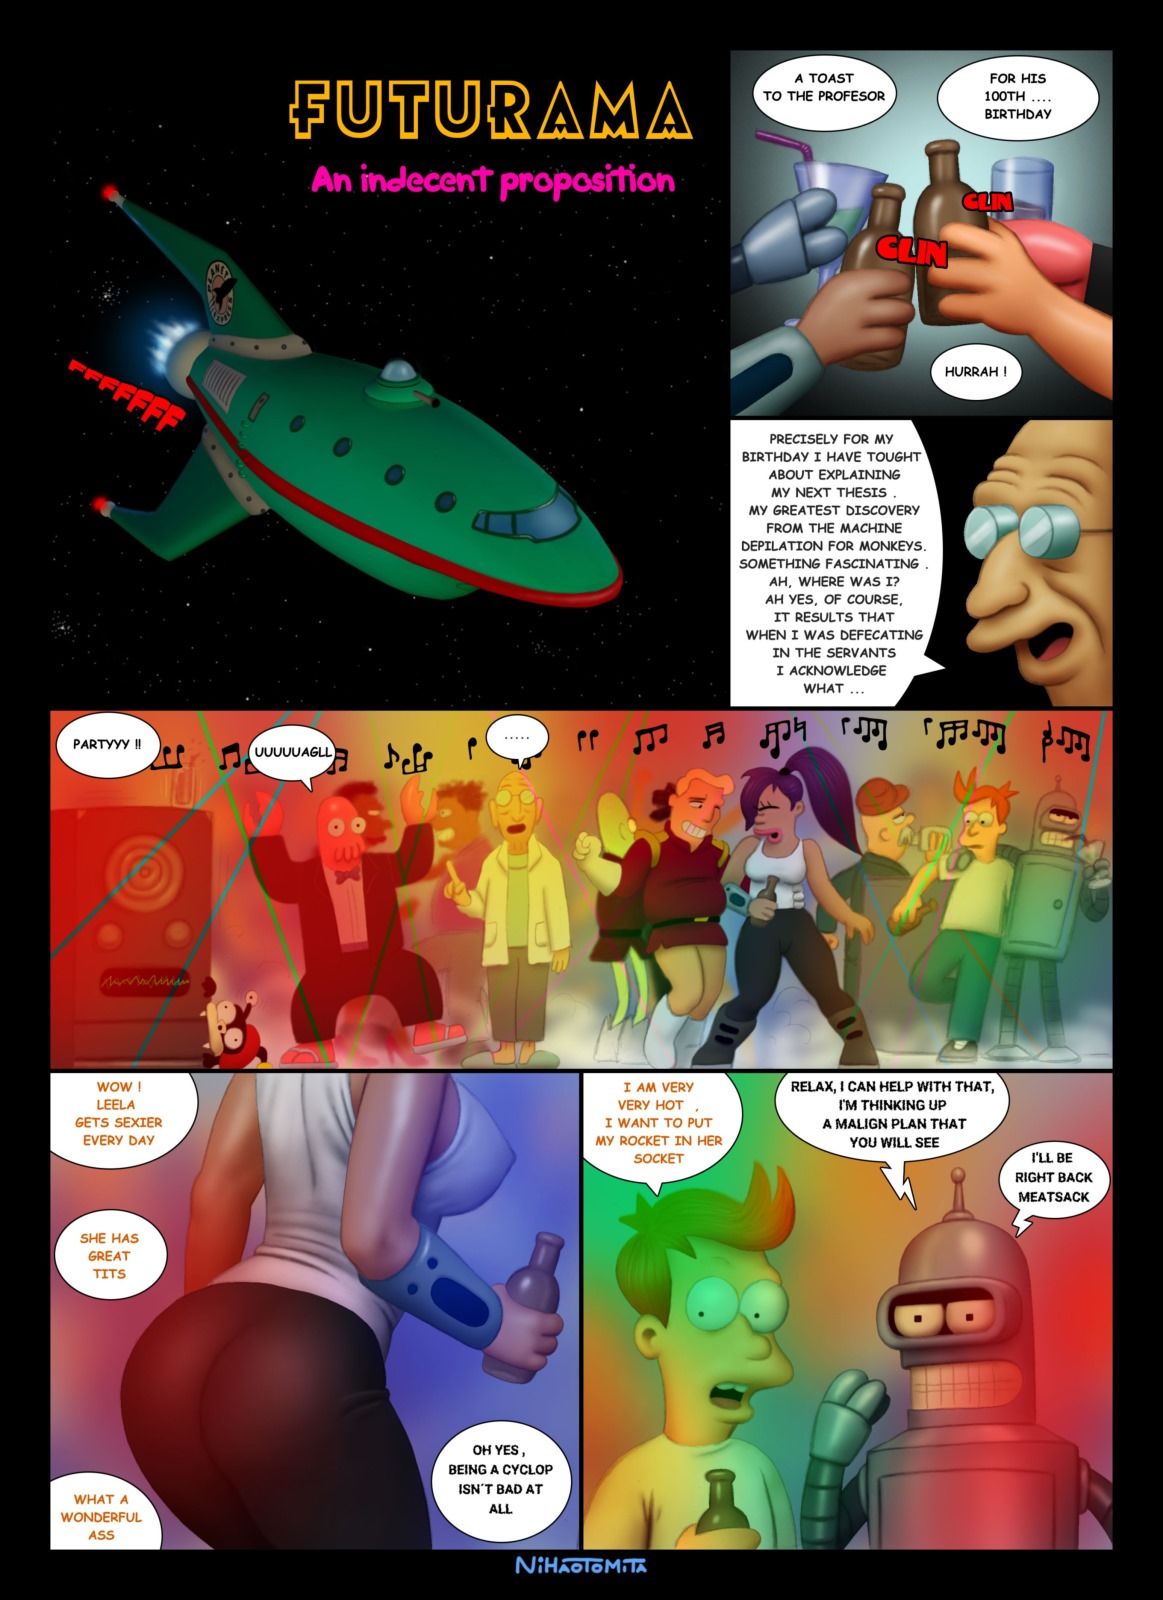 [nihaotomita] Futurama - An indecent proposition page 1